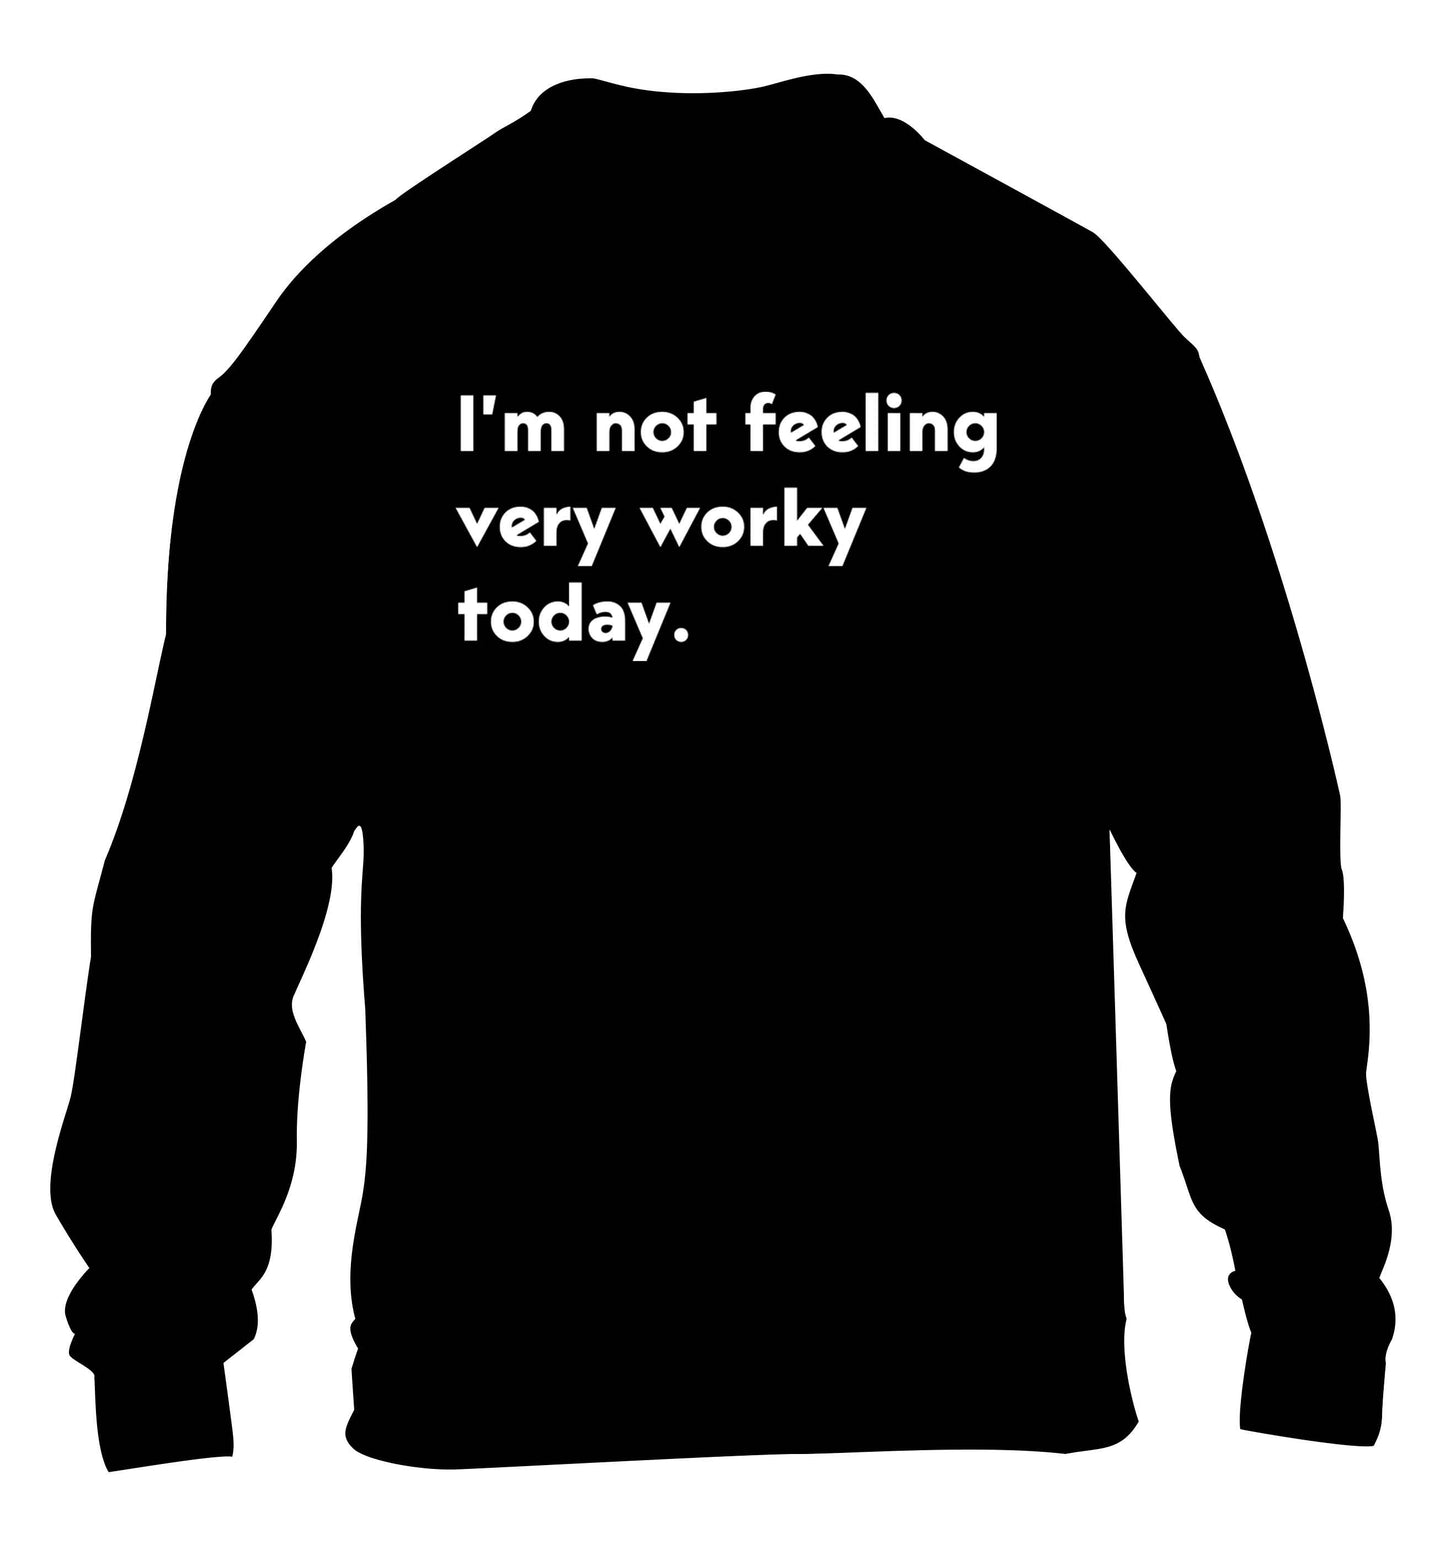 I'm not feeling very worky today children's black sweater 12-13 Years